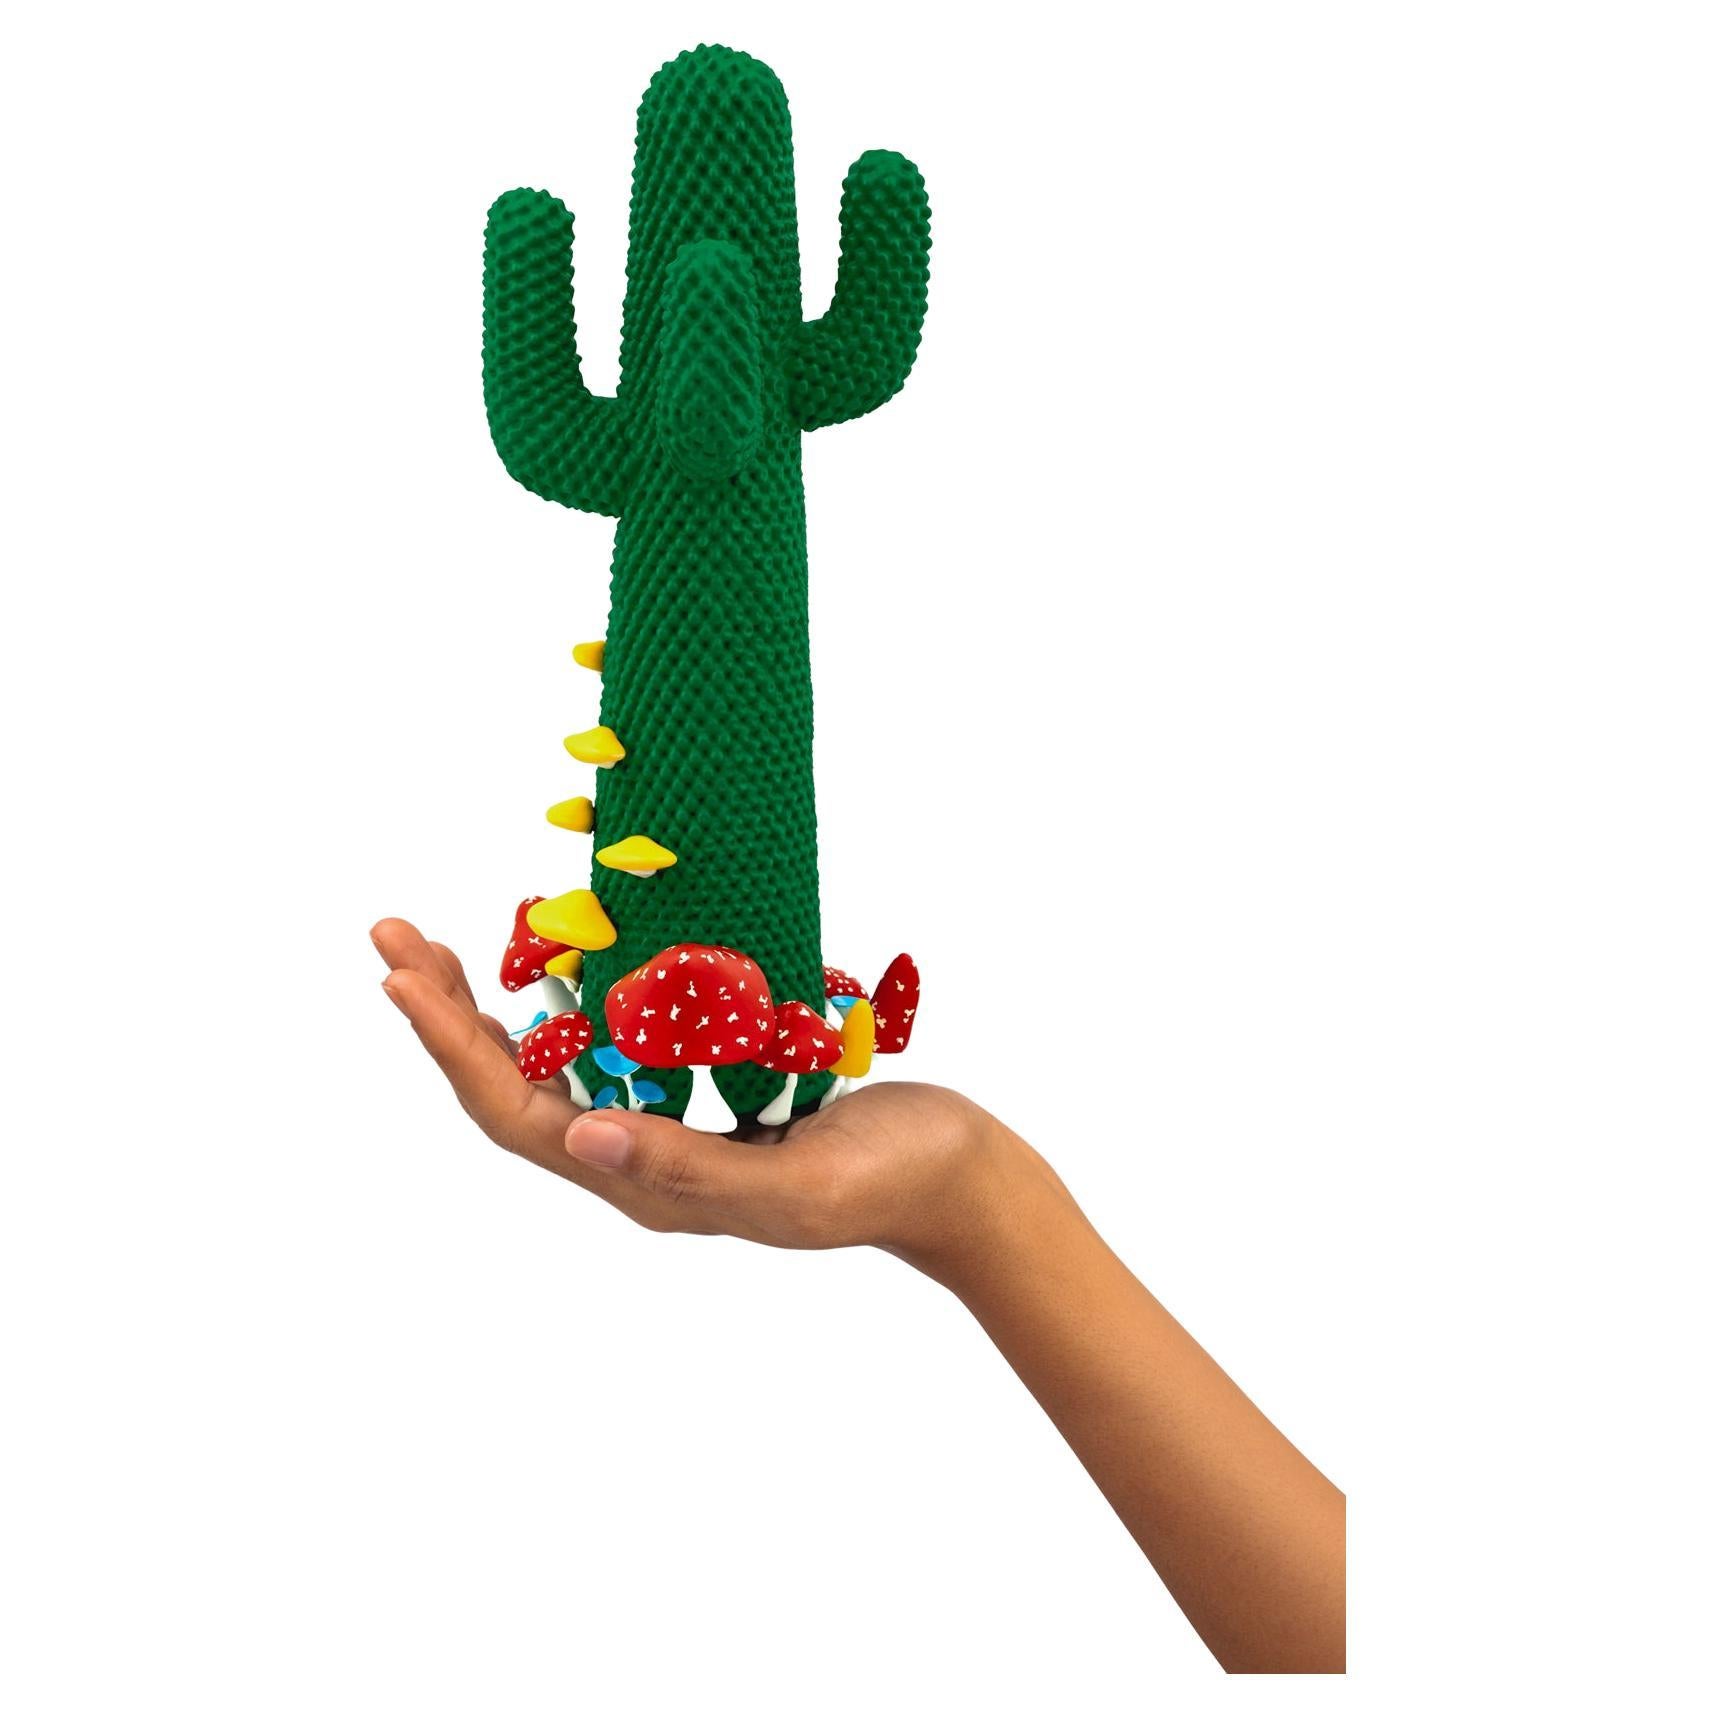 Limited Edition #79/99

Gufram presents the miniaturised version of the Shroom CACTUS® created in collaboration with A$AP Rocky and the artist’s new design studio HOMMEMADE Exactly as the real-Size Shroom CACTUS®, the new Guframini piece features